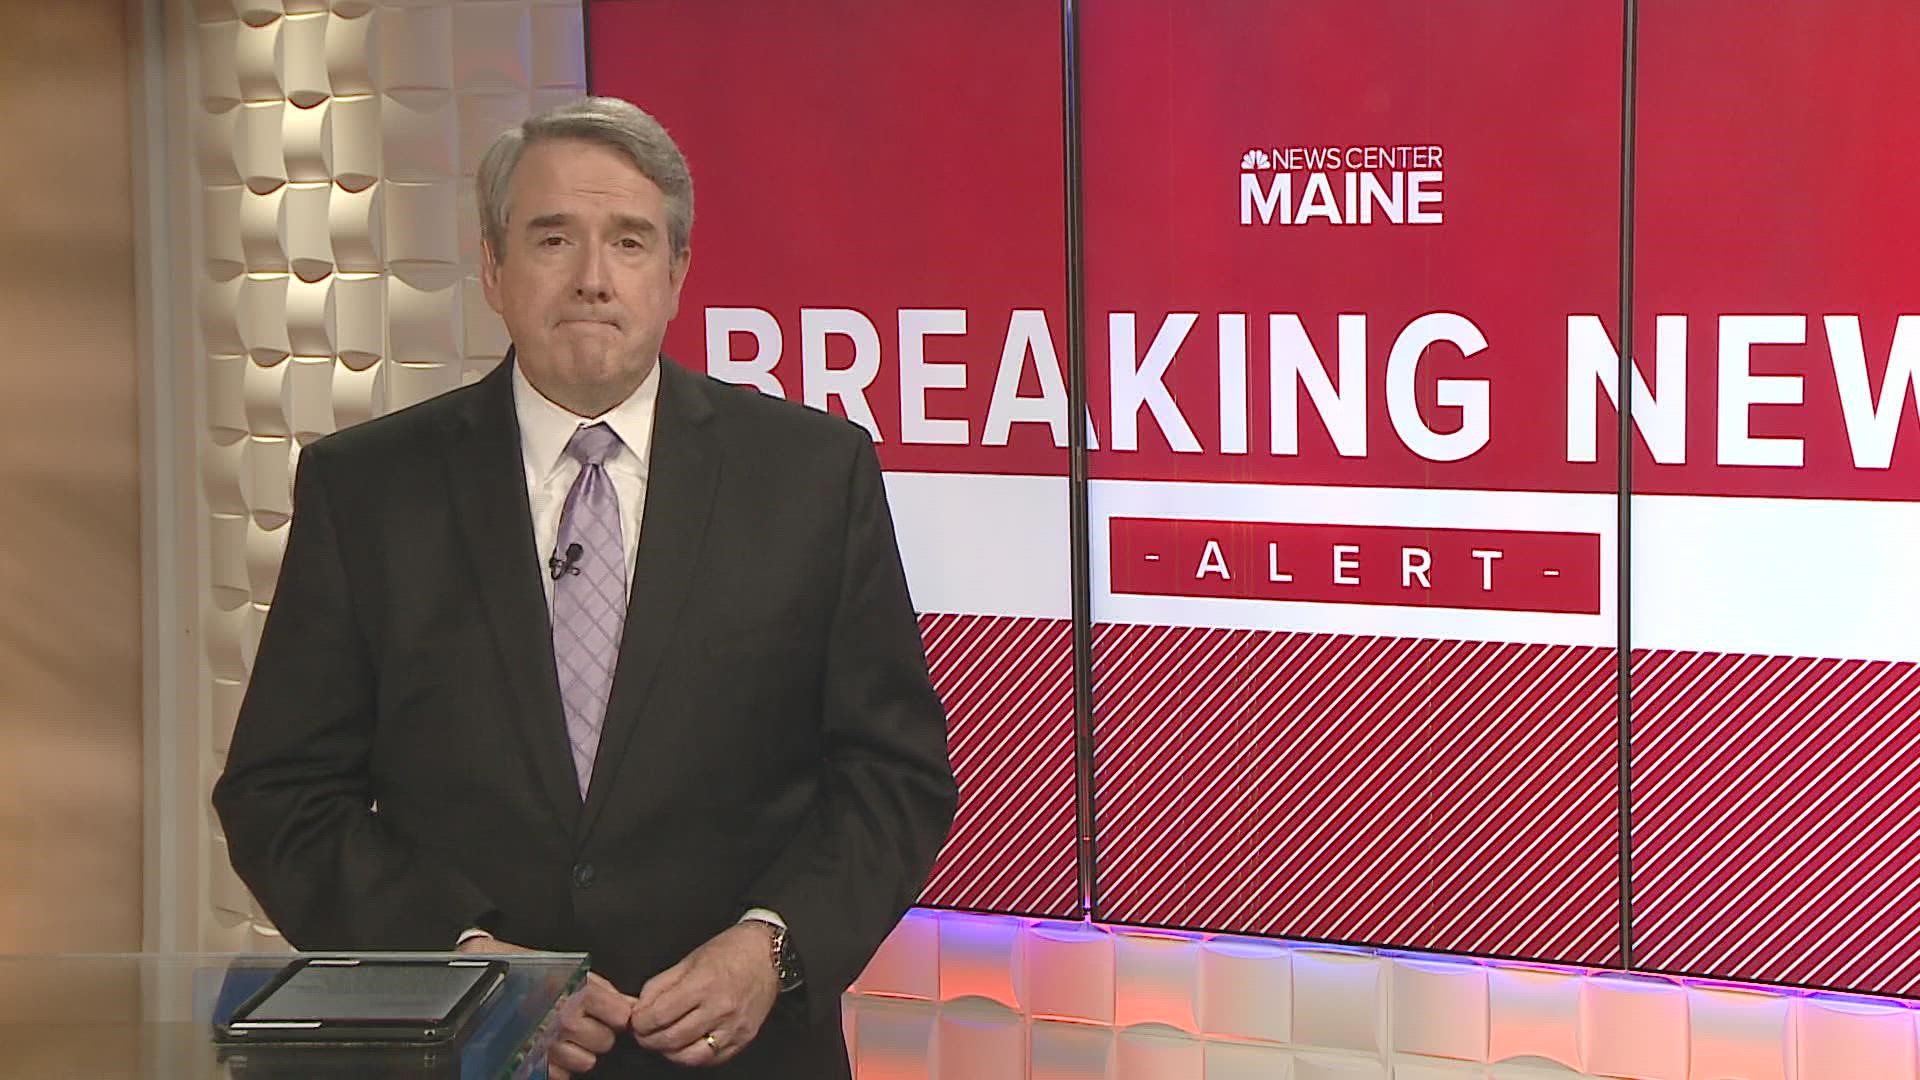 Maine Department of Public Safety spokesperson Shannon Moss told NEWS CENTER Maine at least one person was shot.